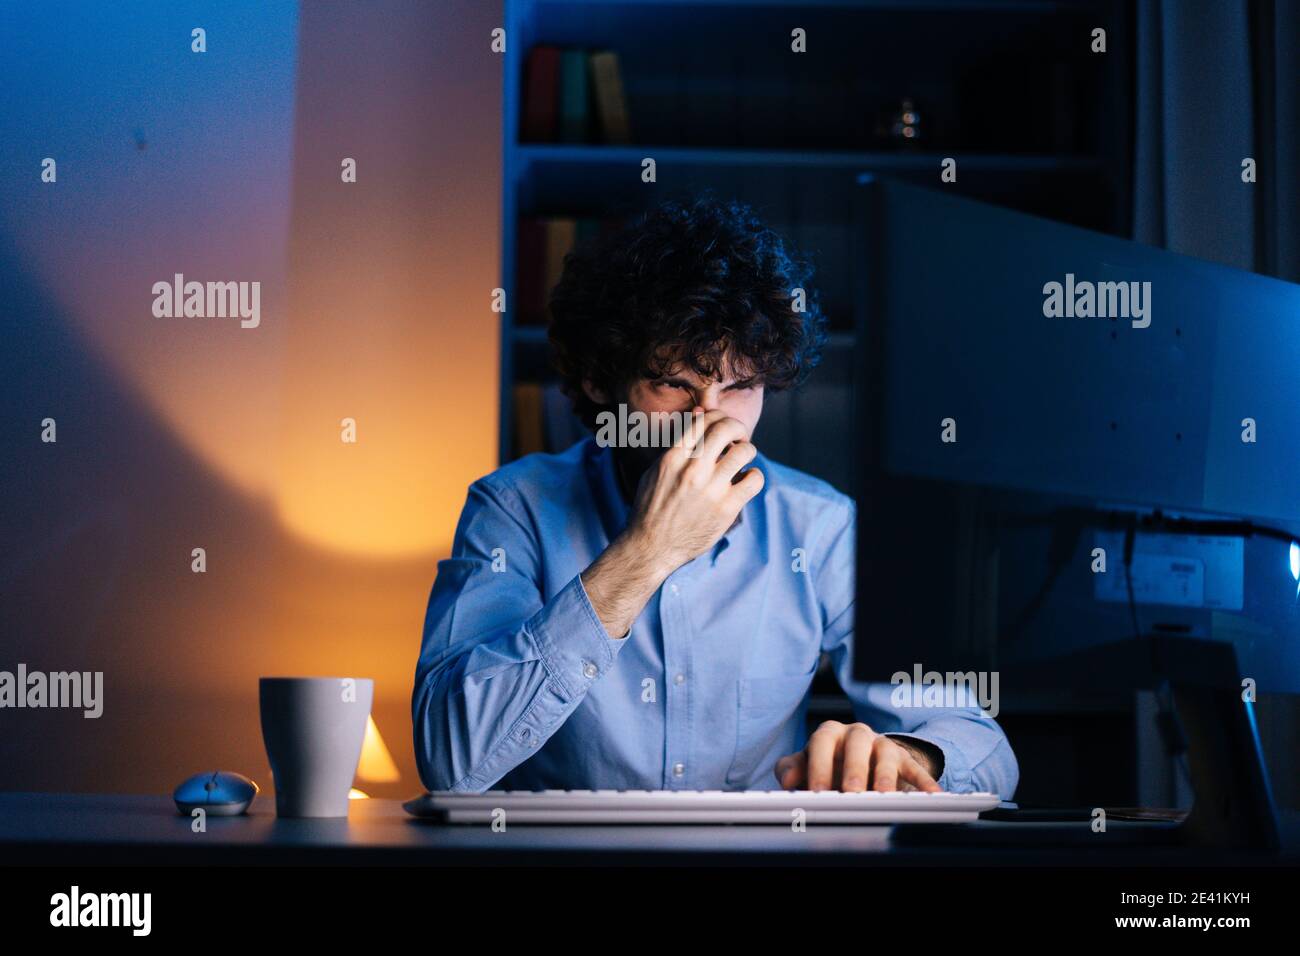 Close-up view of unhappy young man having idea moment pointing finger up while sitting at desk. Stock Photo